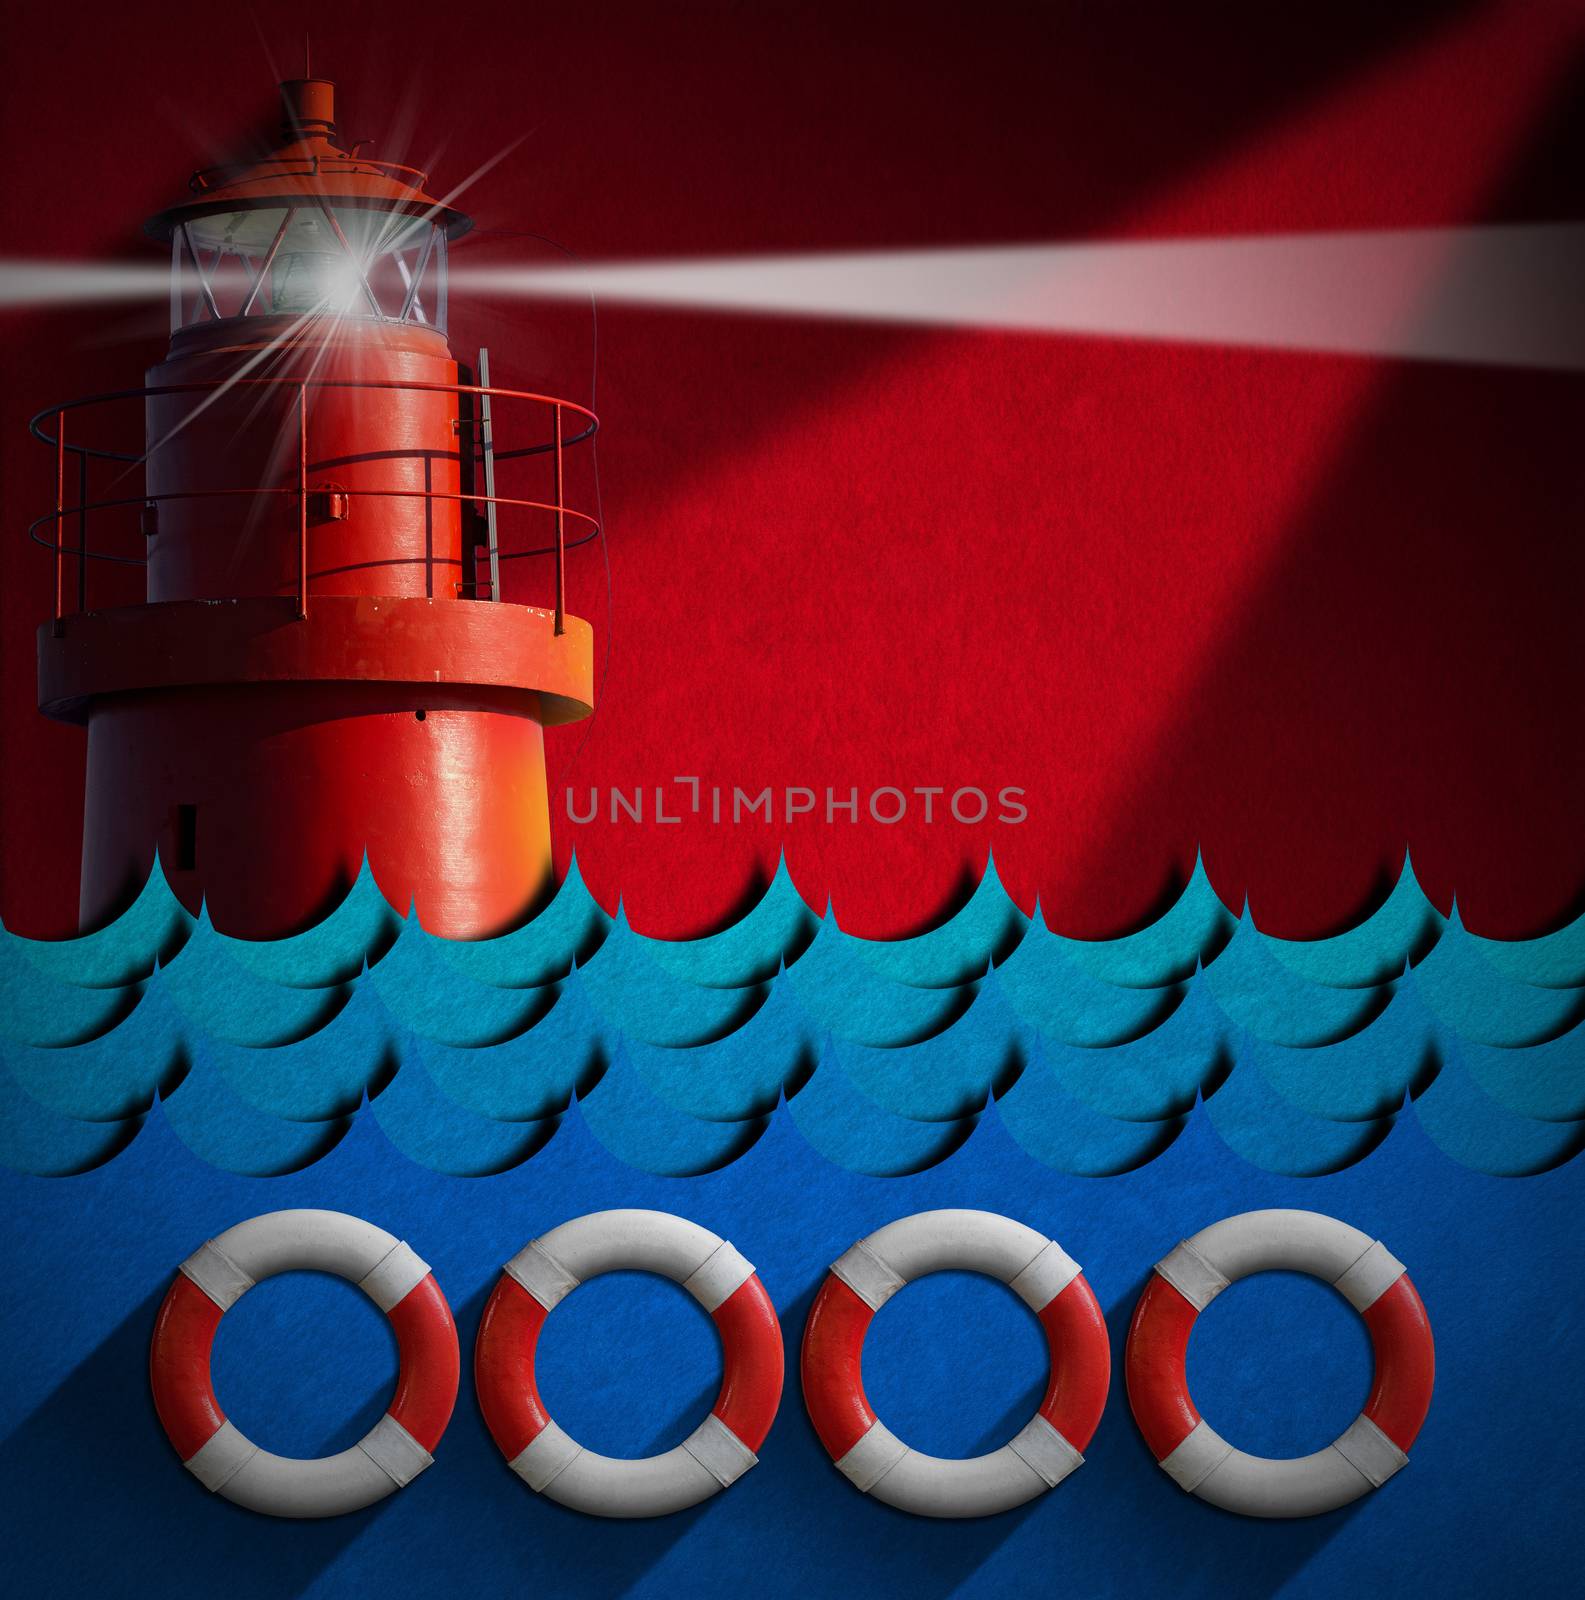 Red and white lifebuoys, blue sea waves and red lighthouse on a red background with shadows. Concept of help or sos